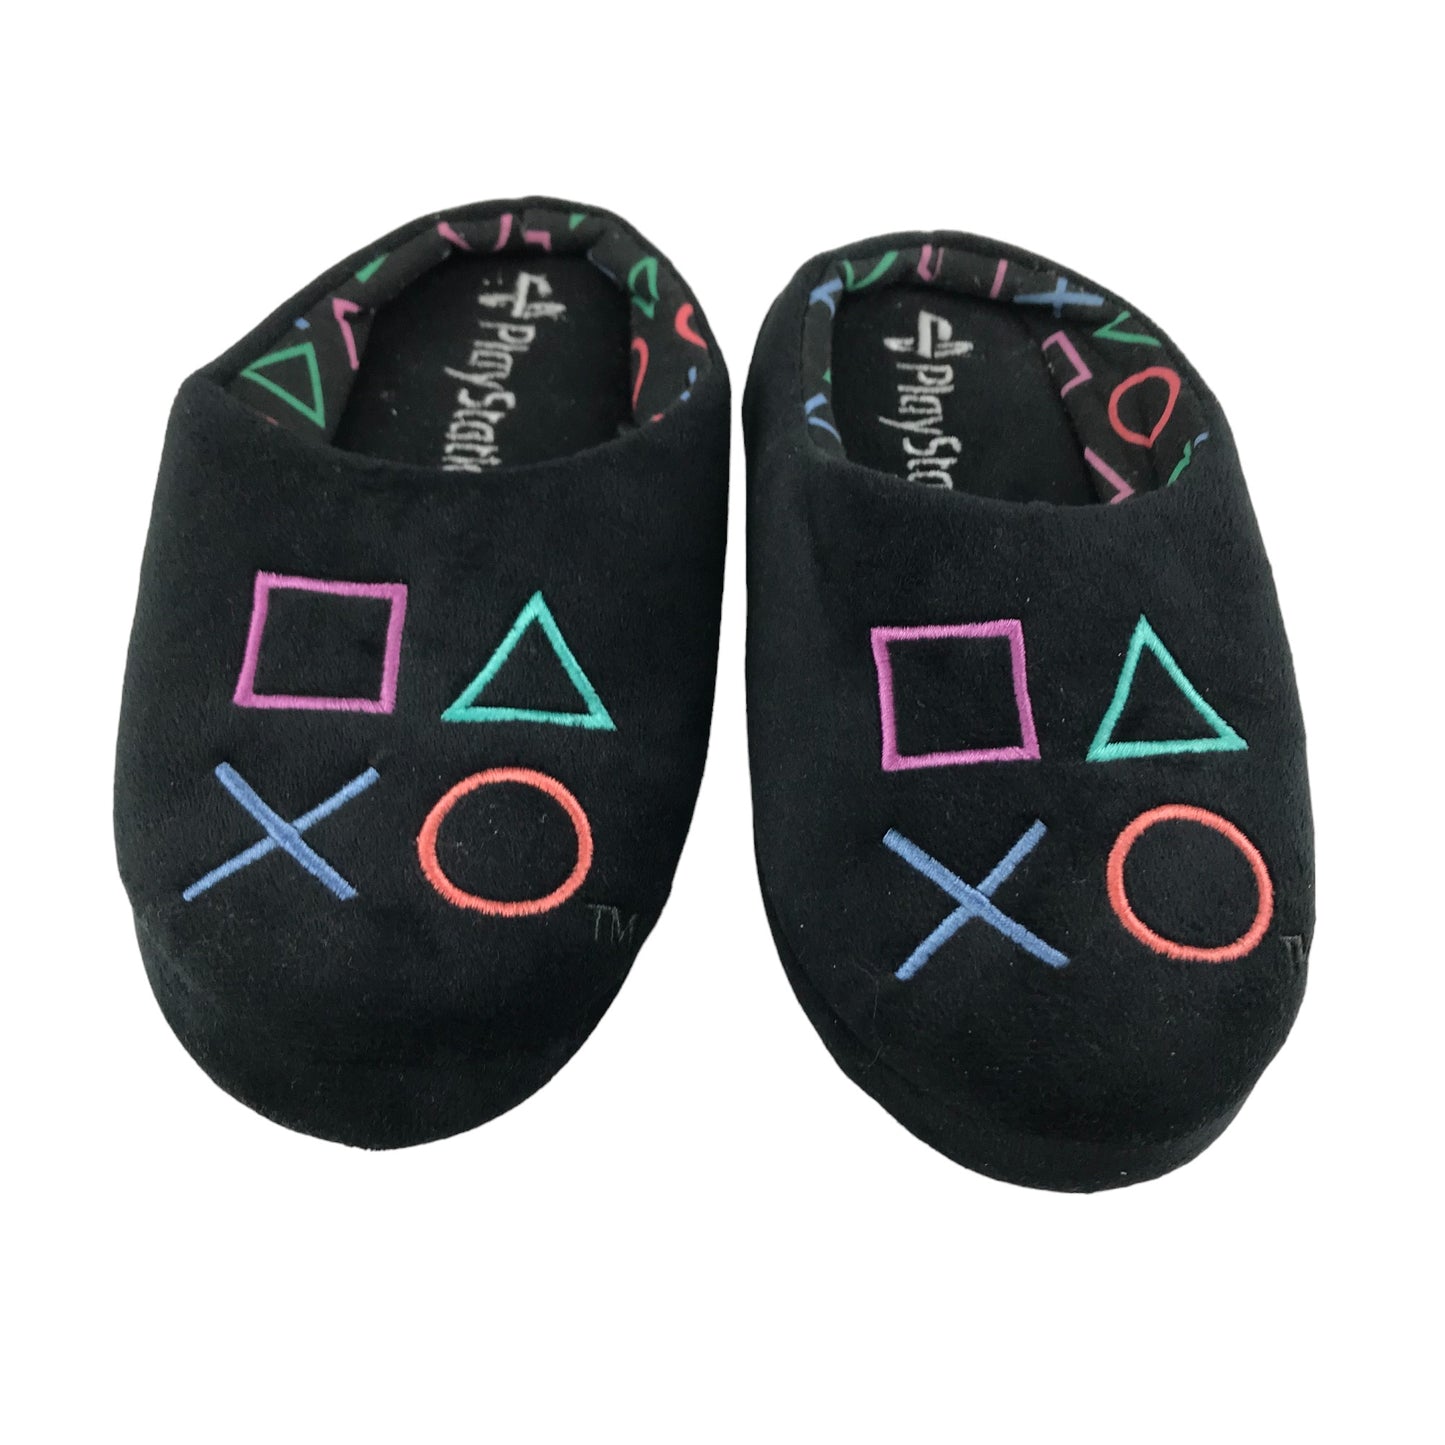 Slippers Shoe Size 3-4 Black PlayStation Gaming